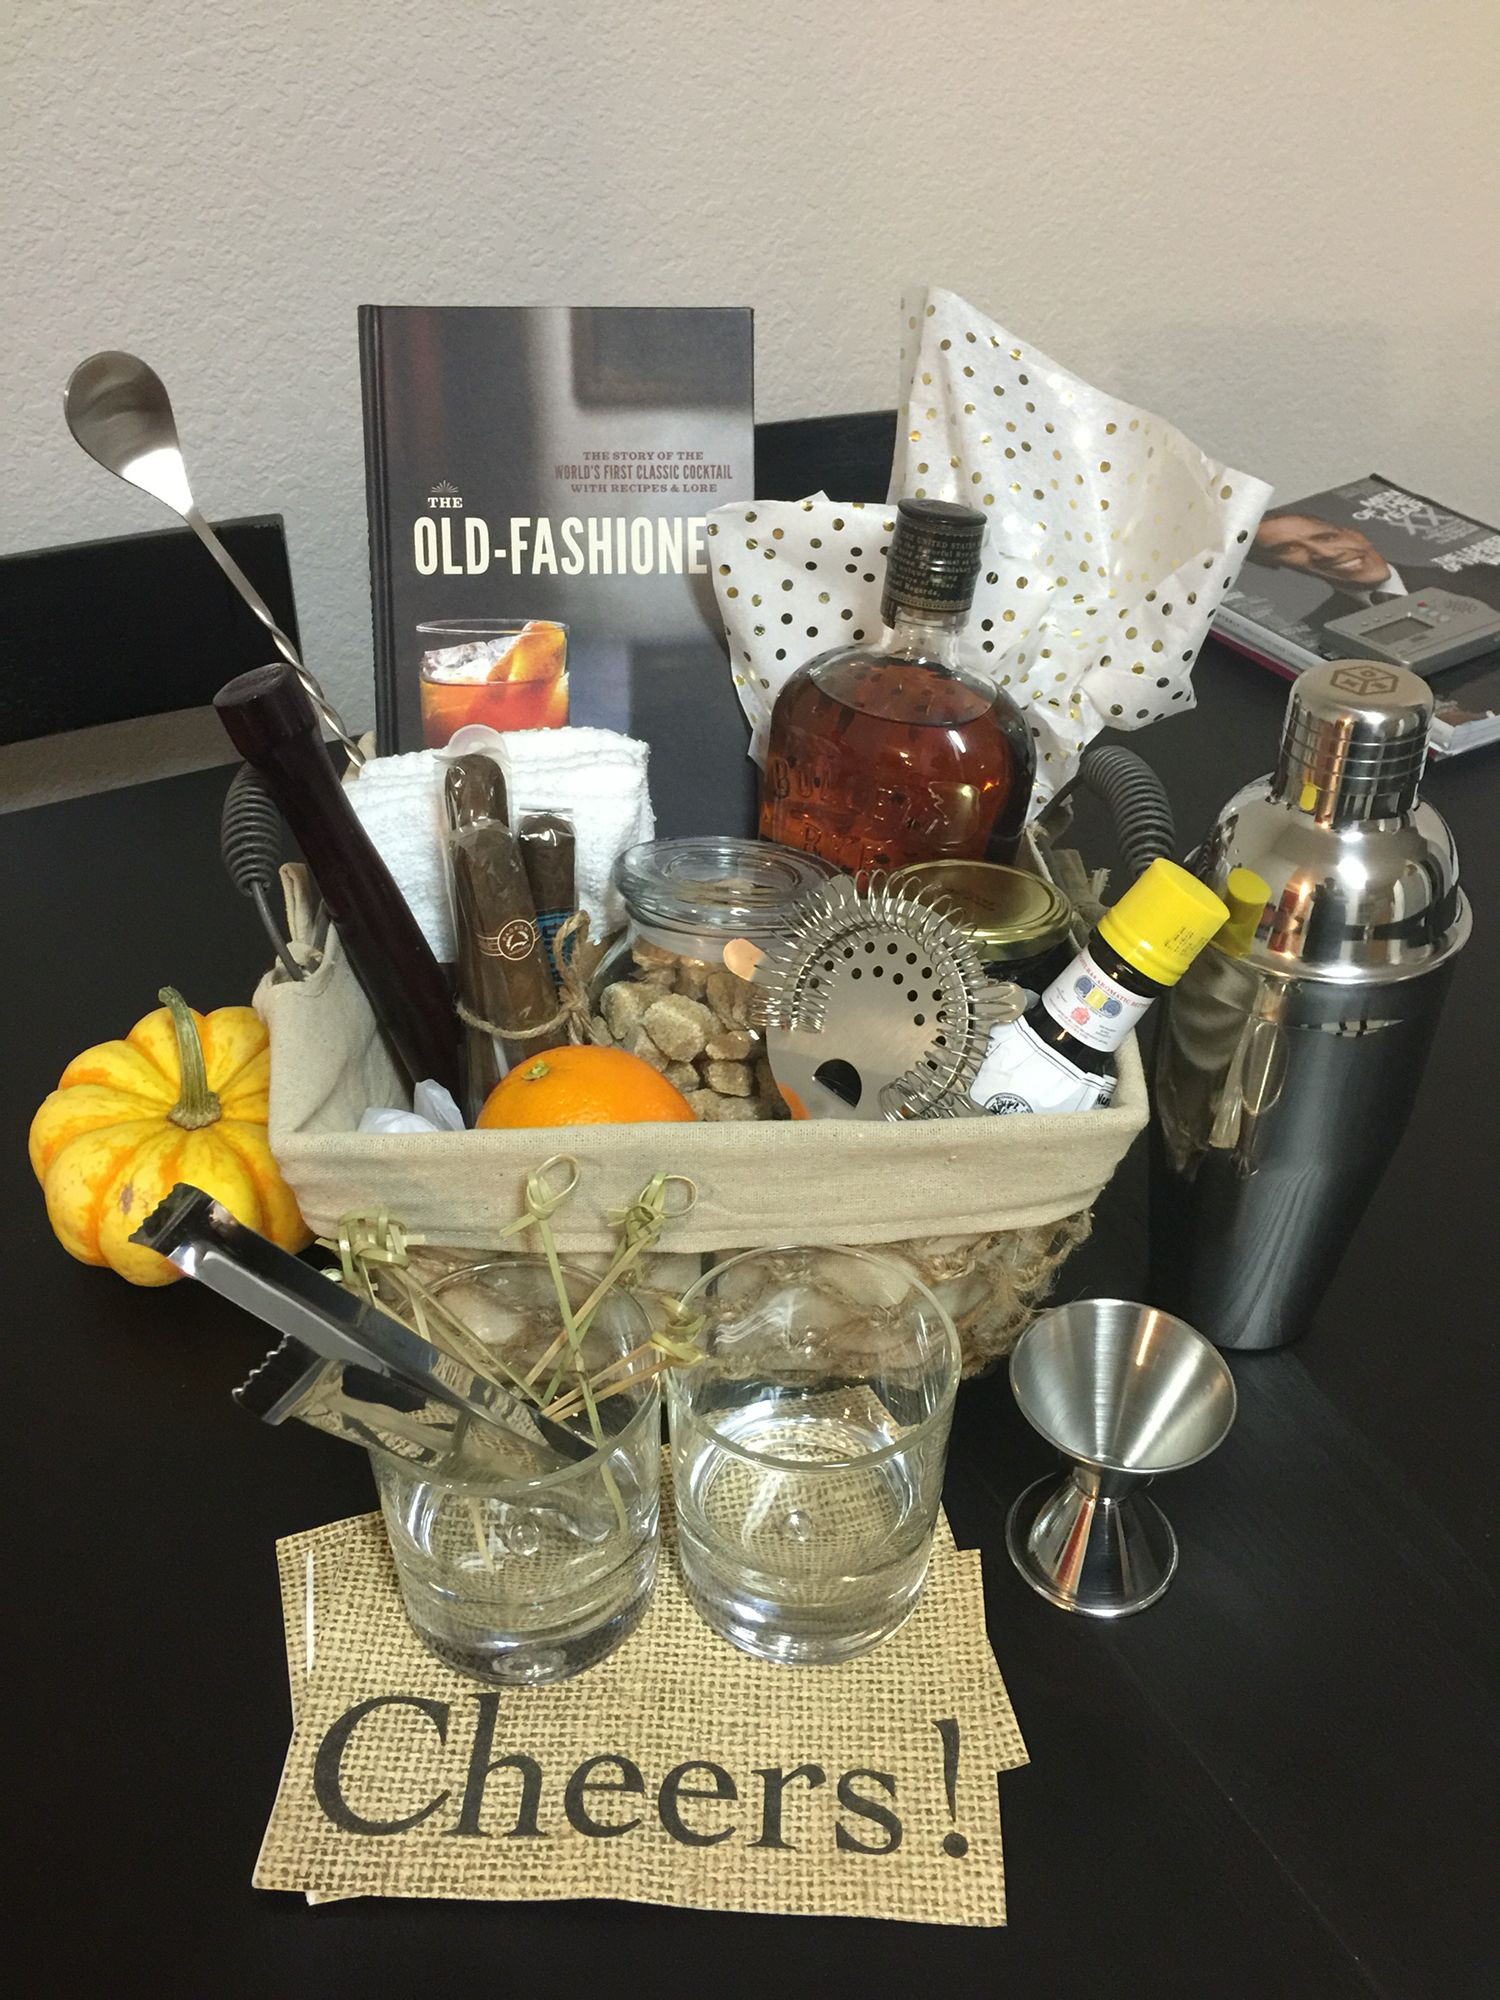 Wine Themed Gift Basket Ideas
 Man Gift Basket the Old Fashion cocktail